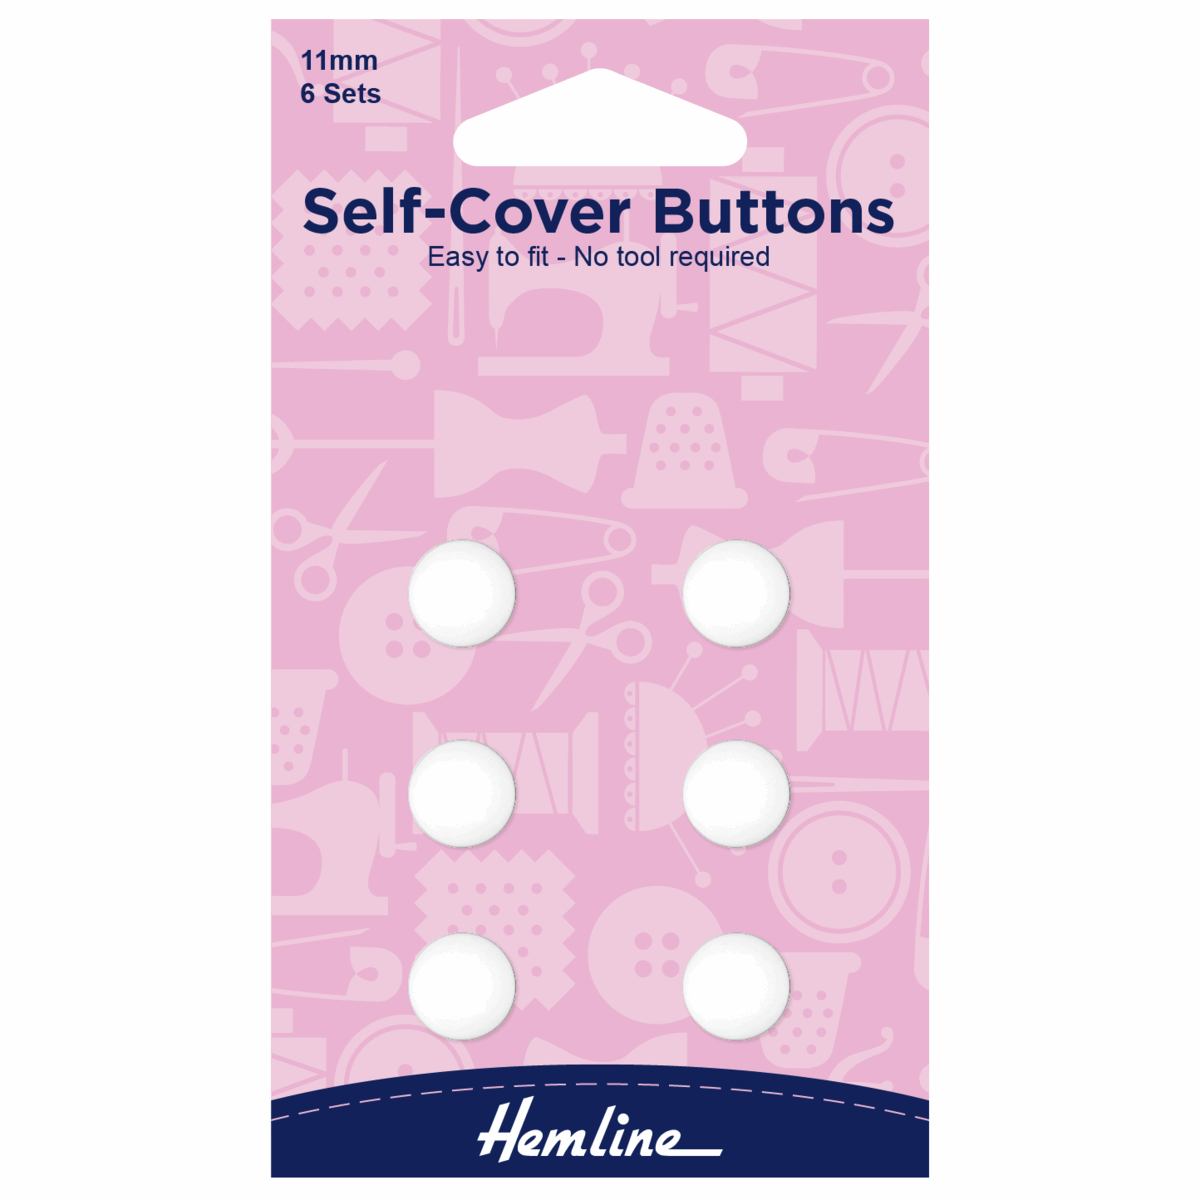 Self-Cover Buttons: Nylon: 11mm